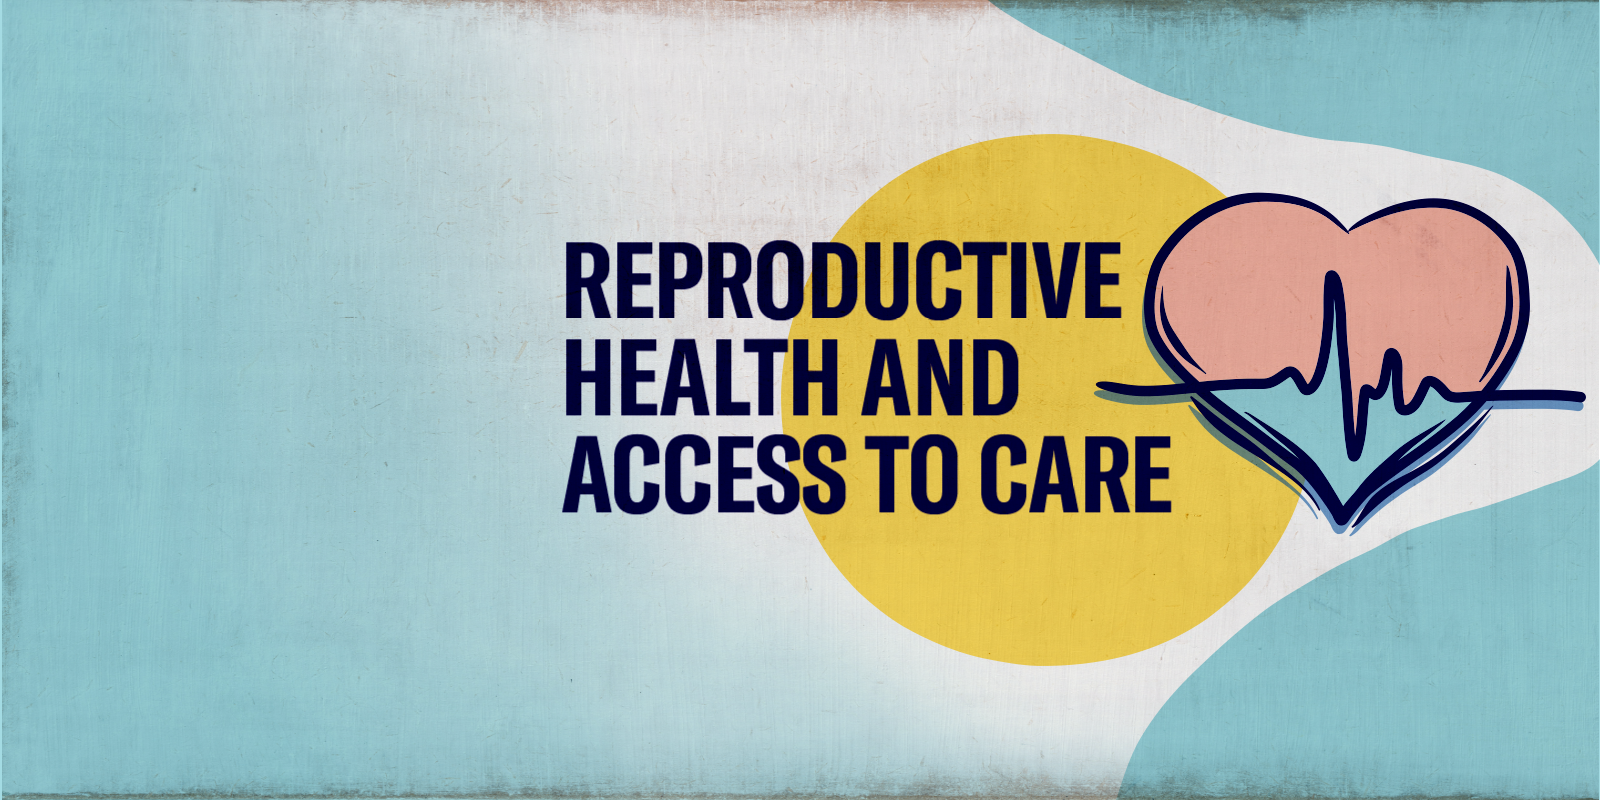 Support Reproductive Health and Access to Care this legislative session!